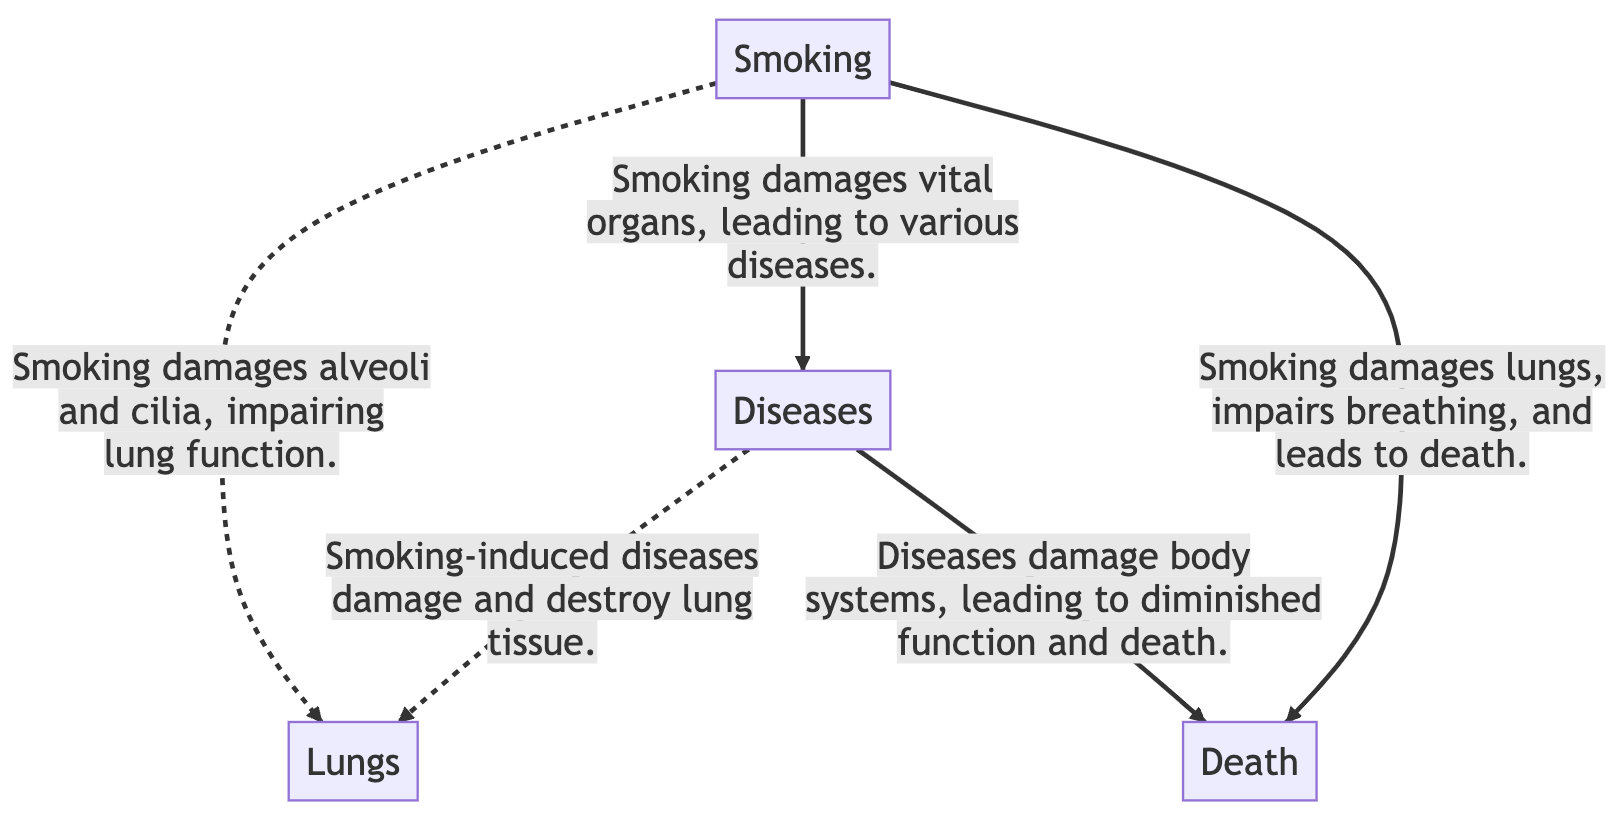 An LLM4CLD diagram based on the Simple Wikipedia article on tobacco smoking